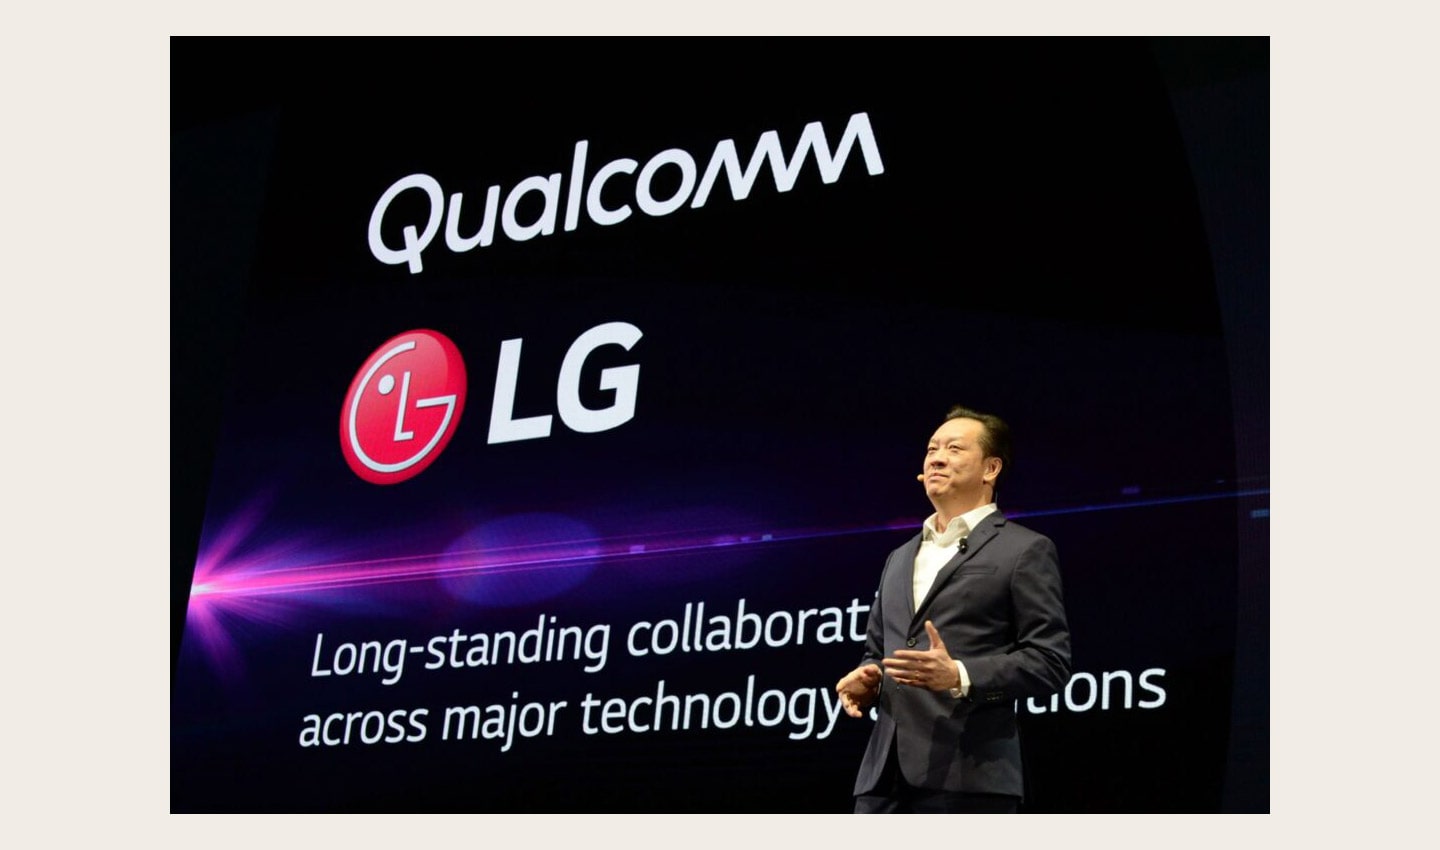 Qualcomm Senior Vice President Jim Tran discusses the partnership with LG for the enhanced 5G technology at LG's CES 2019 Press Conference.